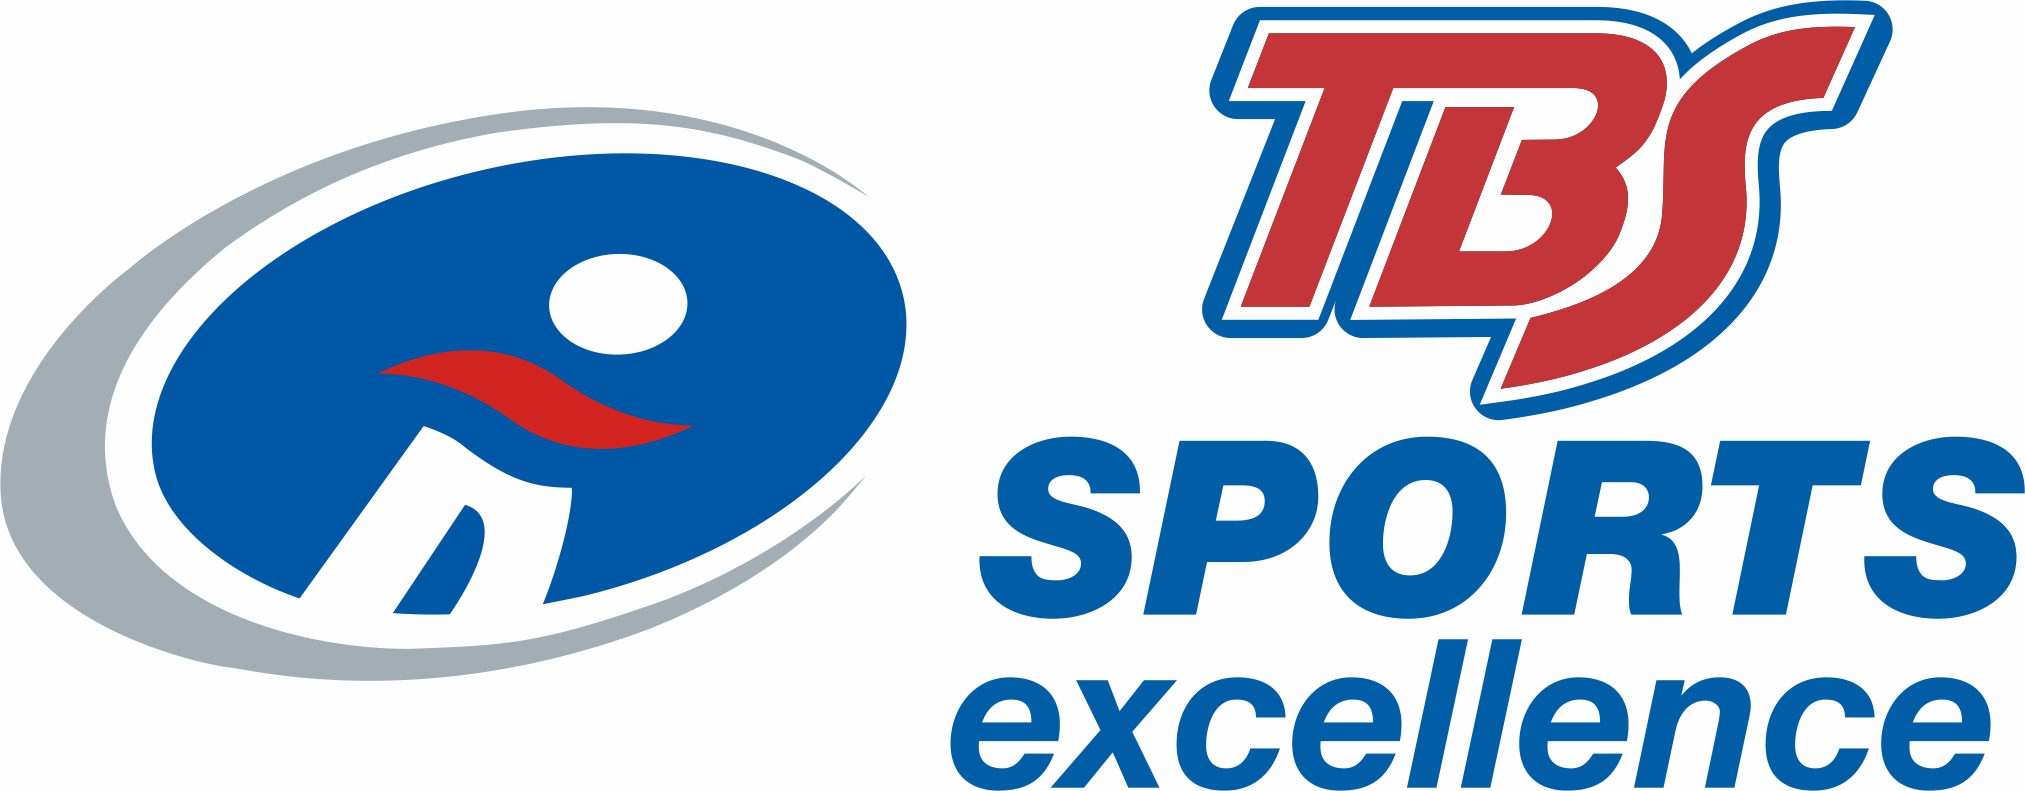 TBS SPORTS EXCELLENCE